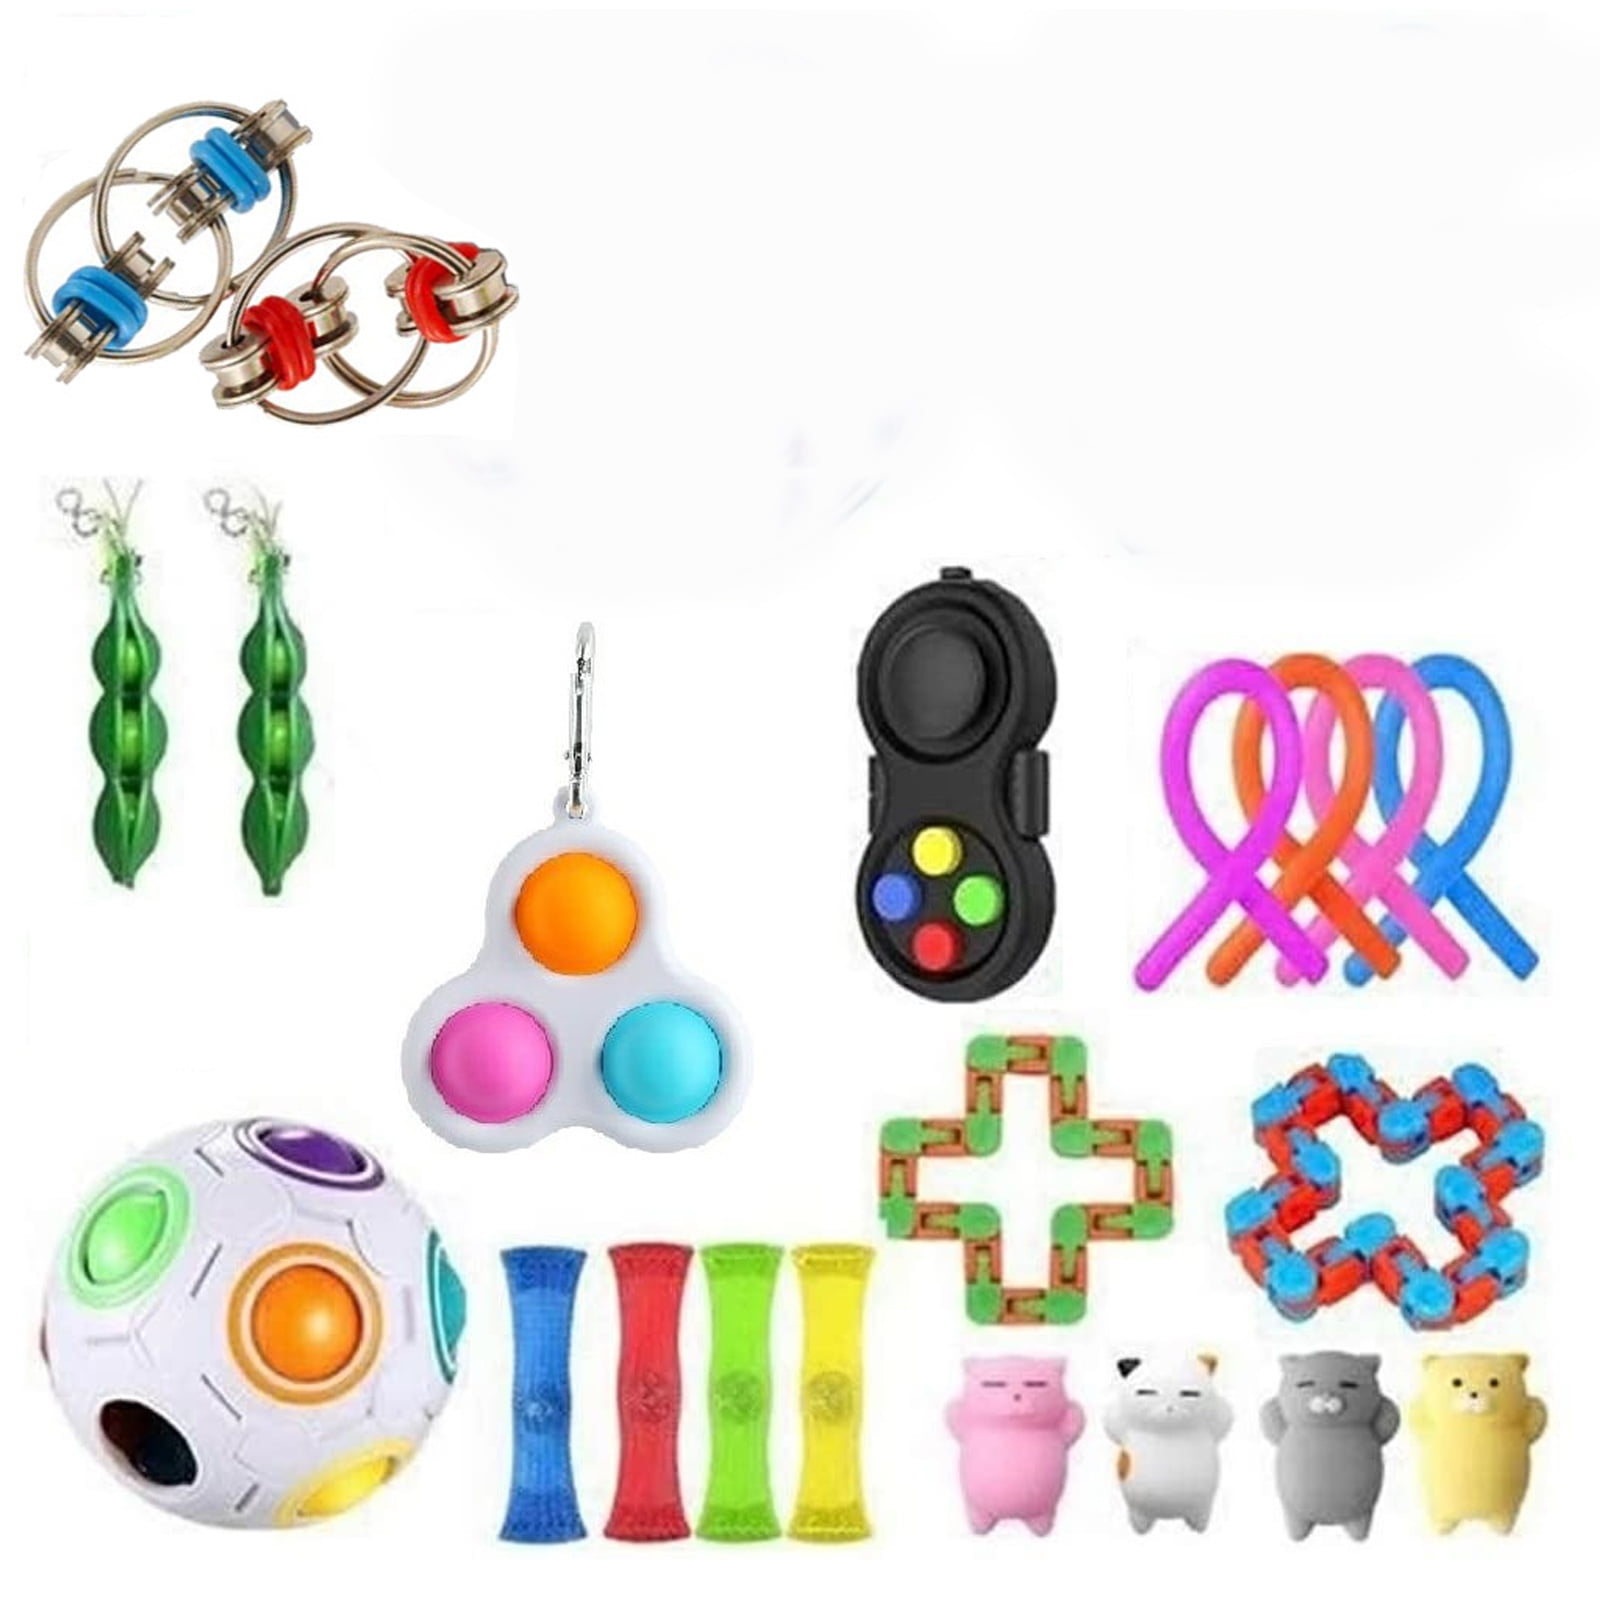 Details about   Fidget Sensory Toys Autism Stress For ADHD Relief Special Need Education 5-50pcs 